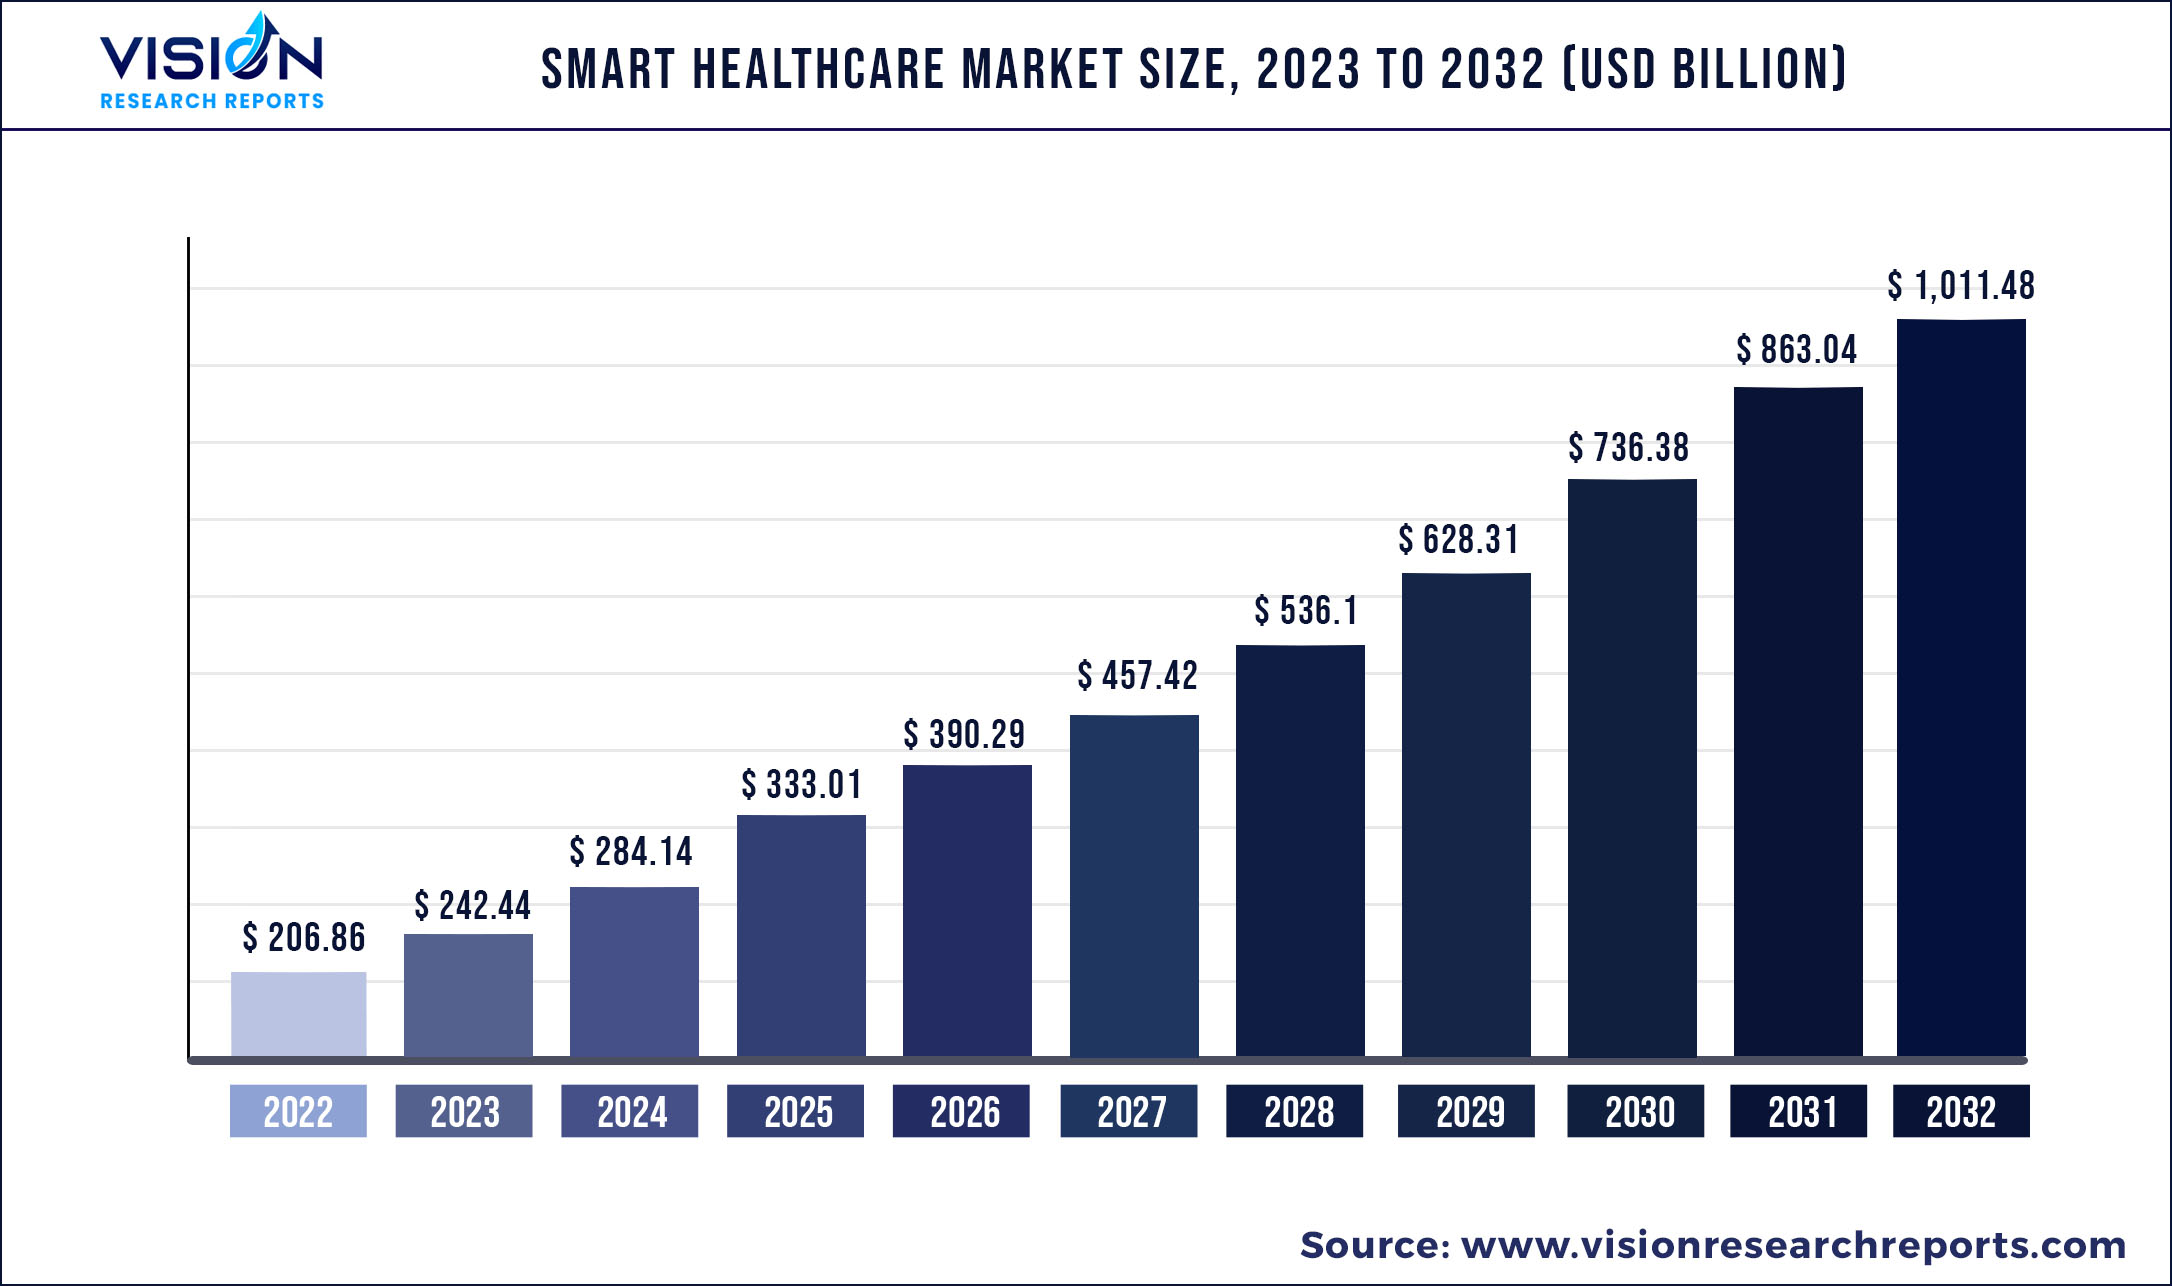 Smart Healthcare Market Size 2023 to 2032